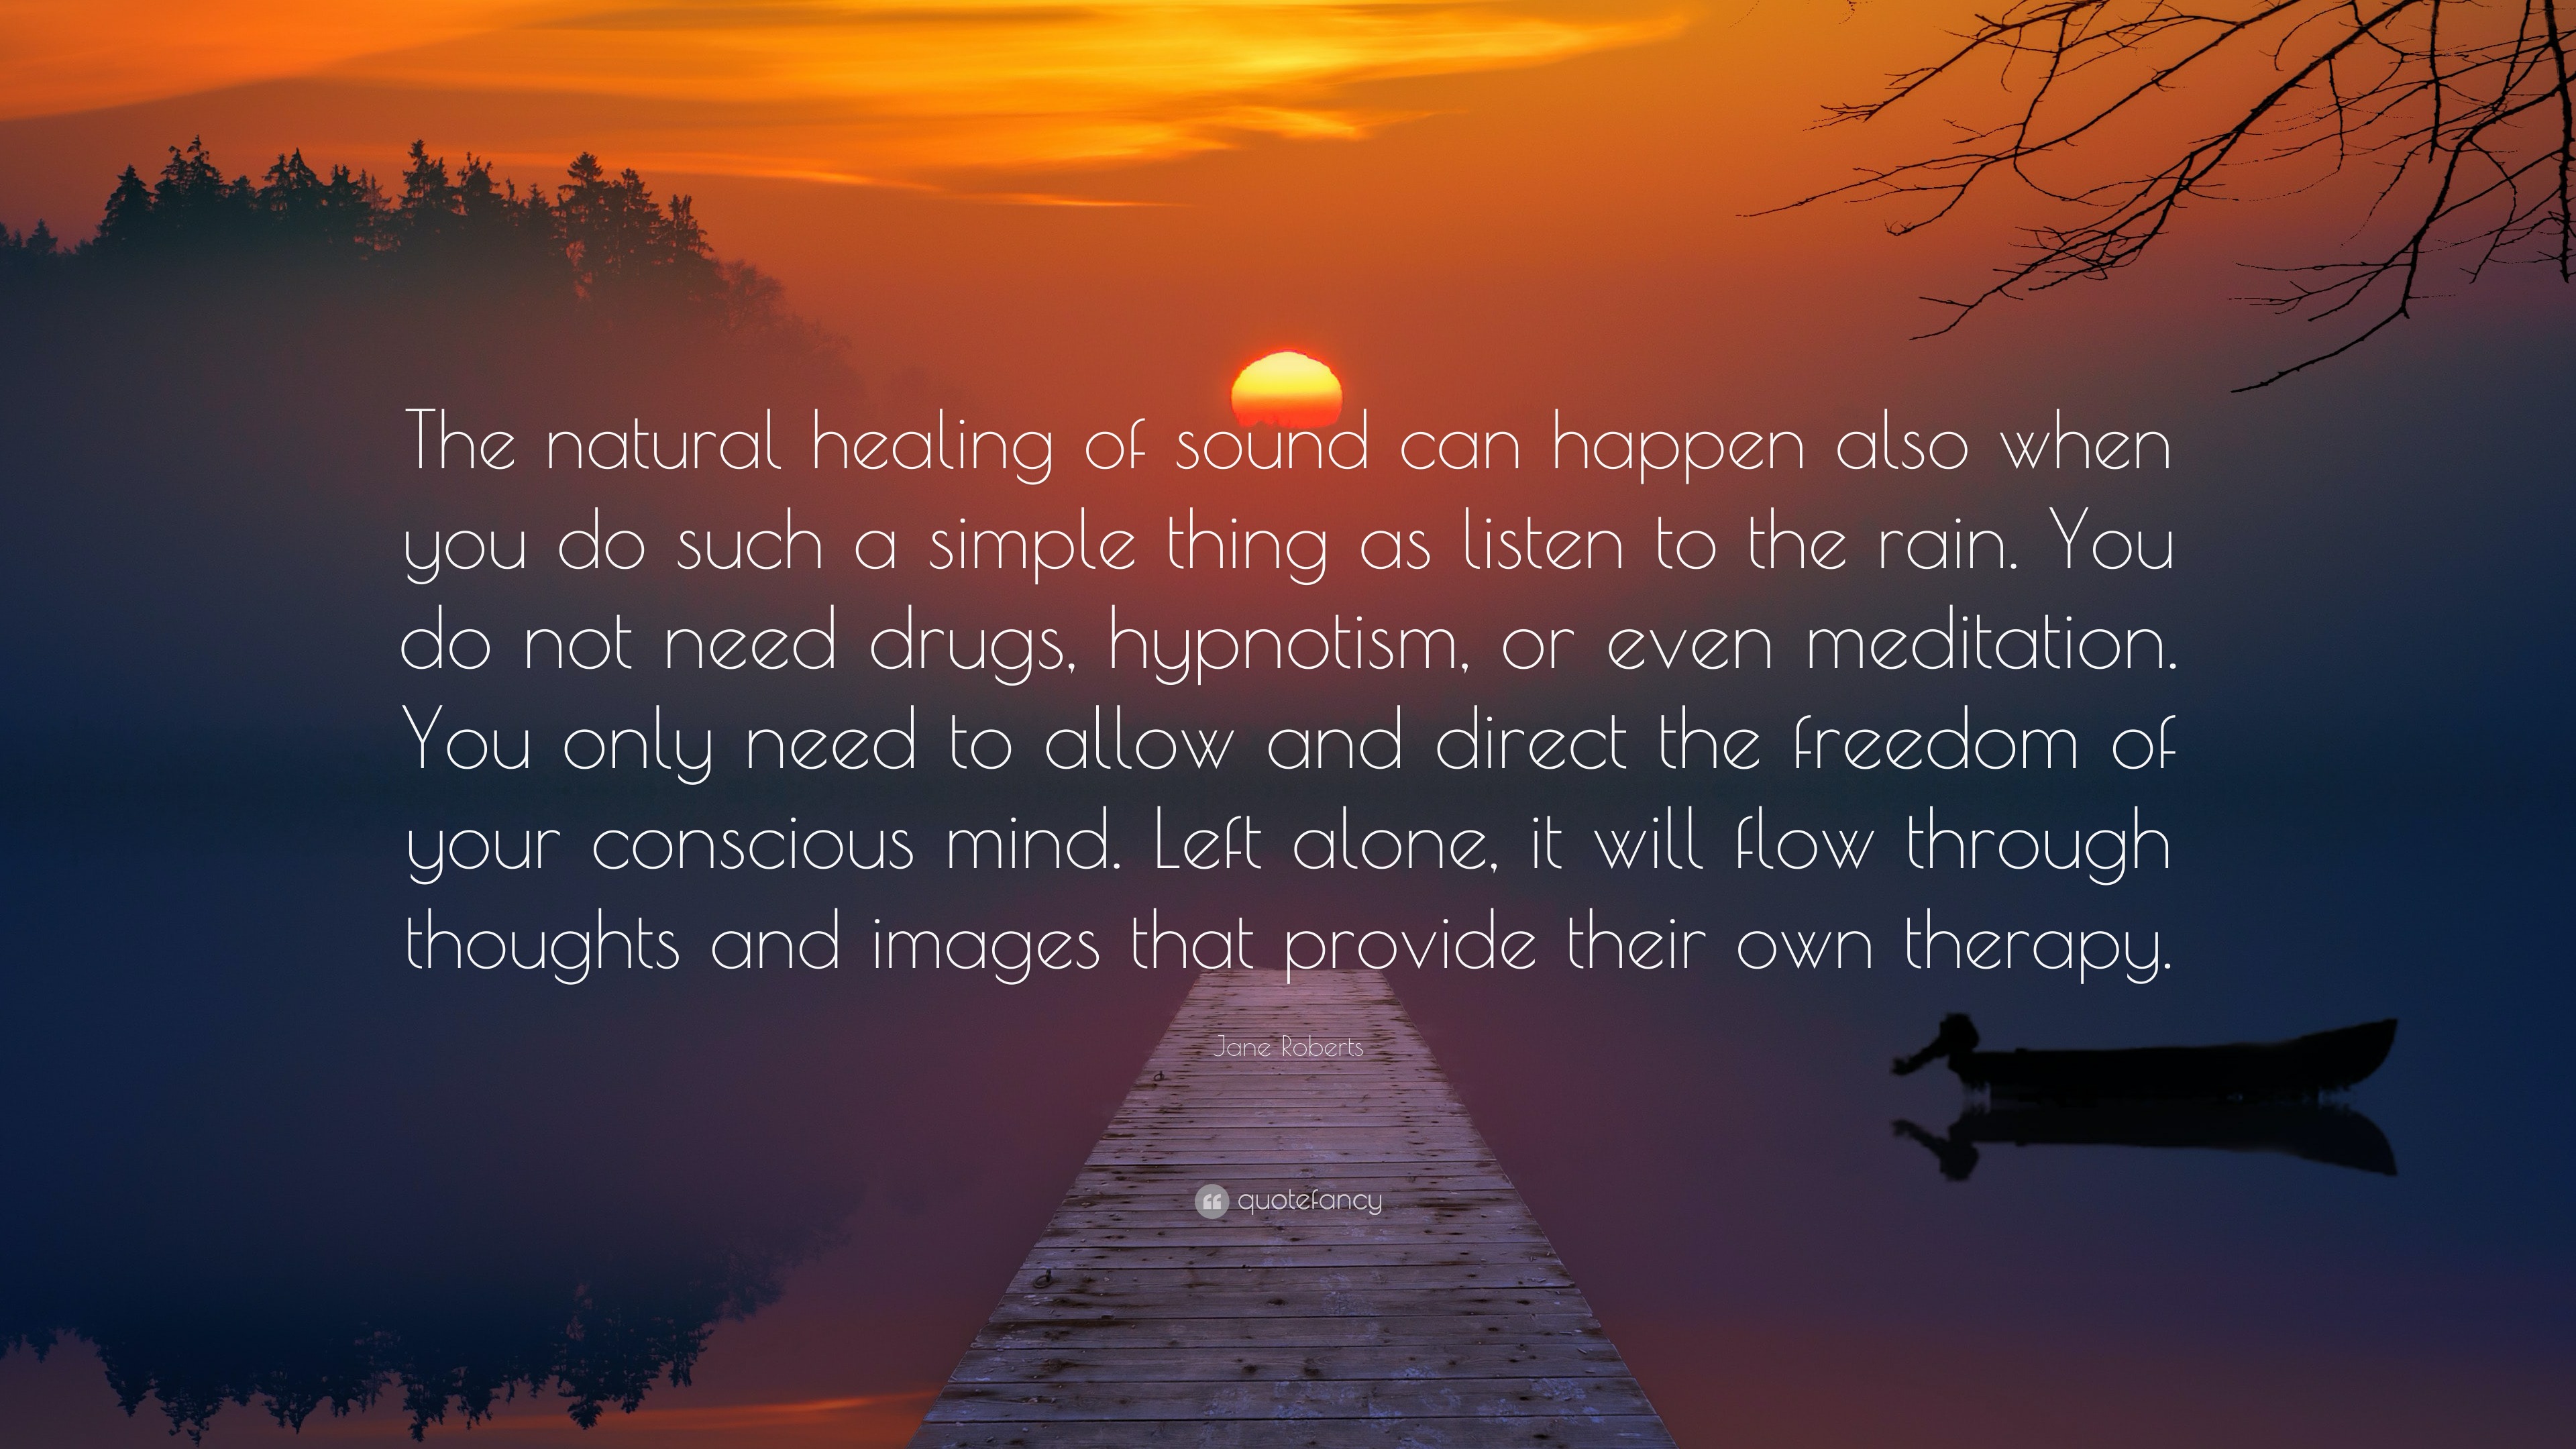 Jane Roberts Quote “The natural healing of sound can happen also when